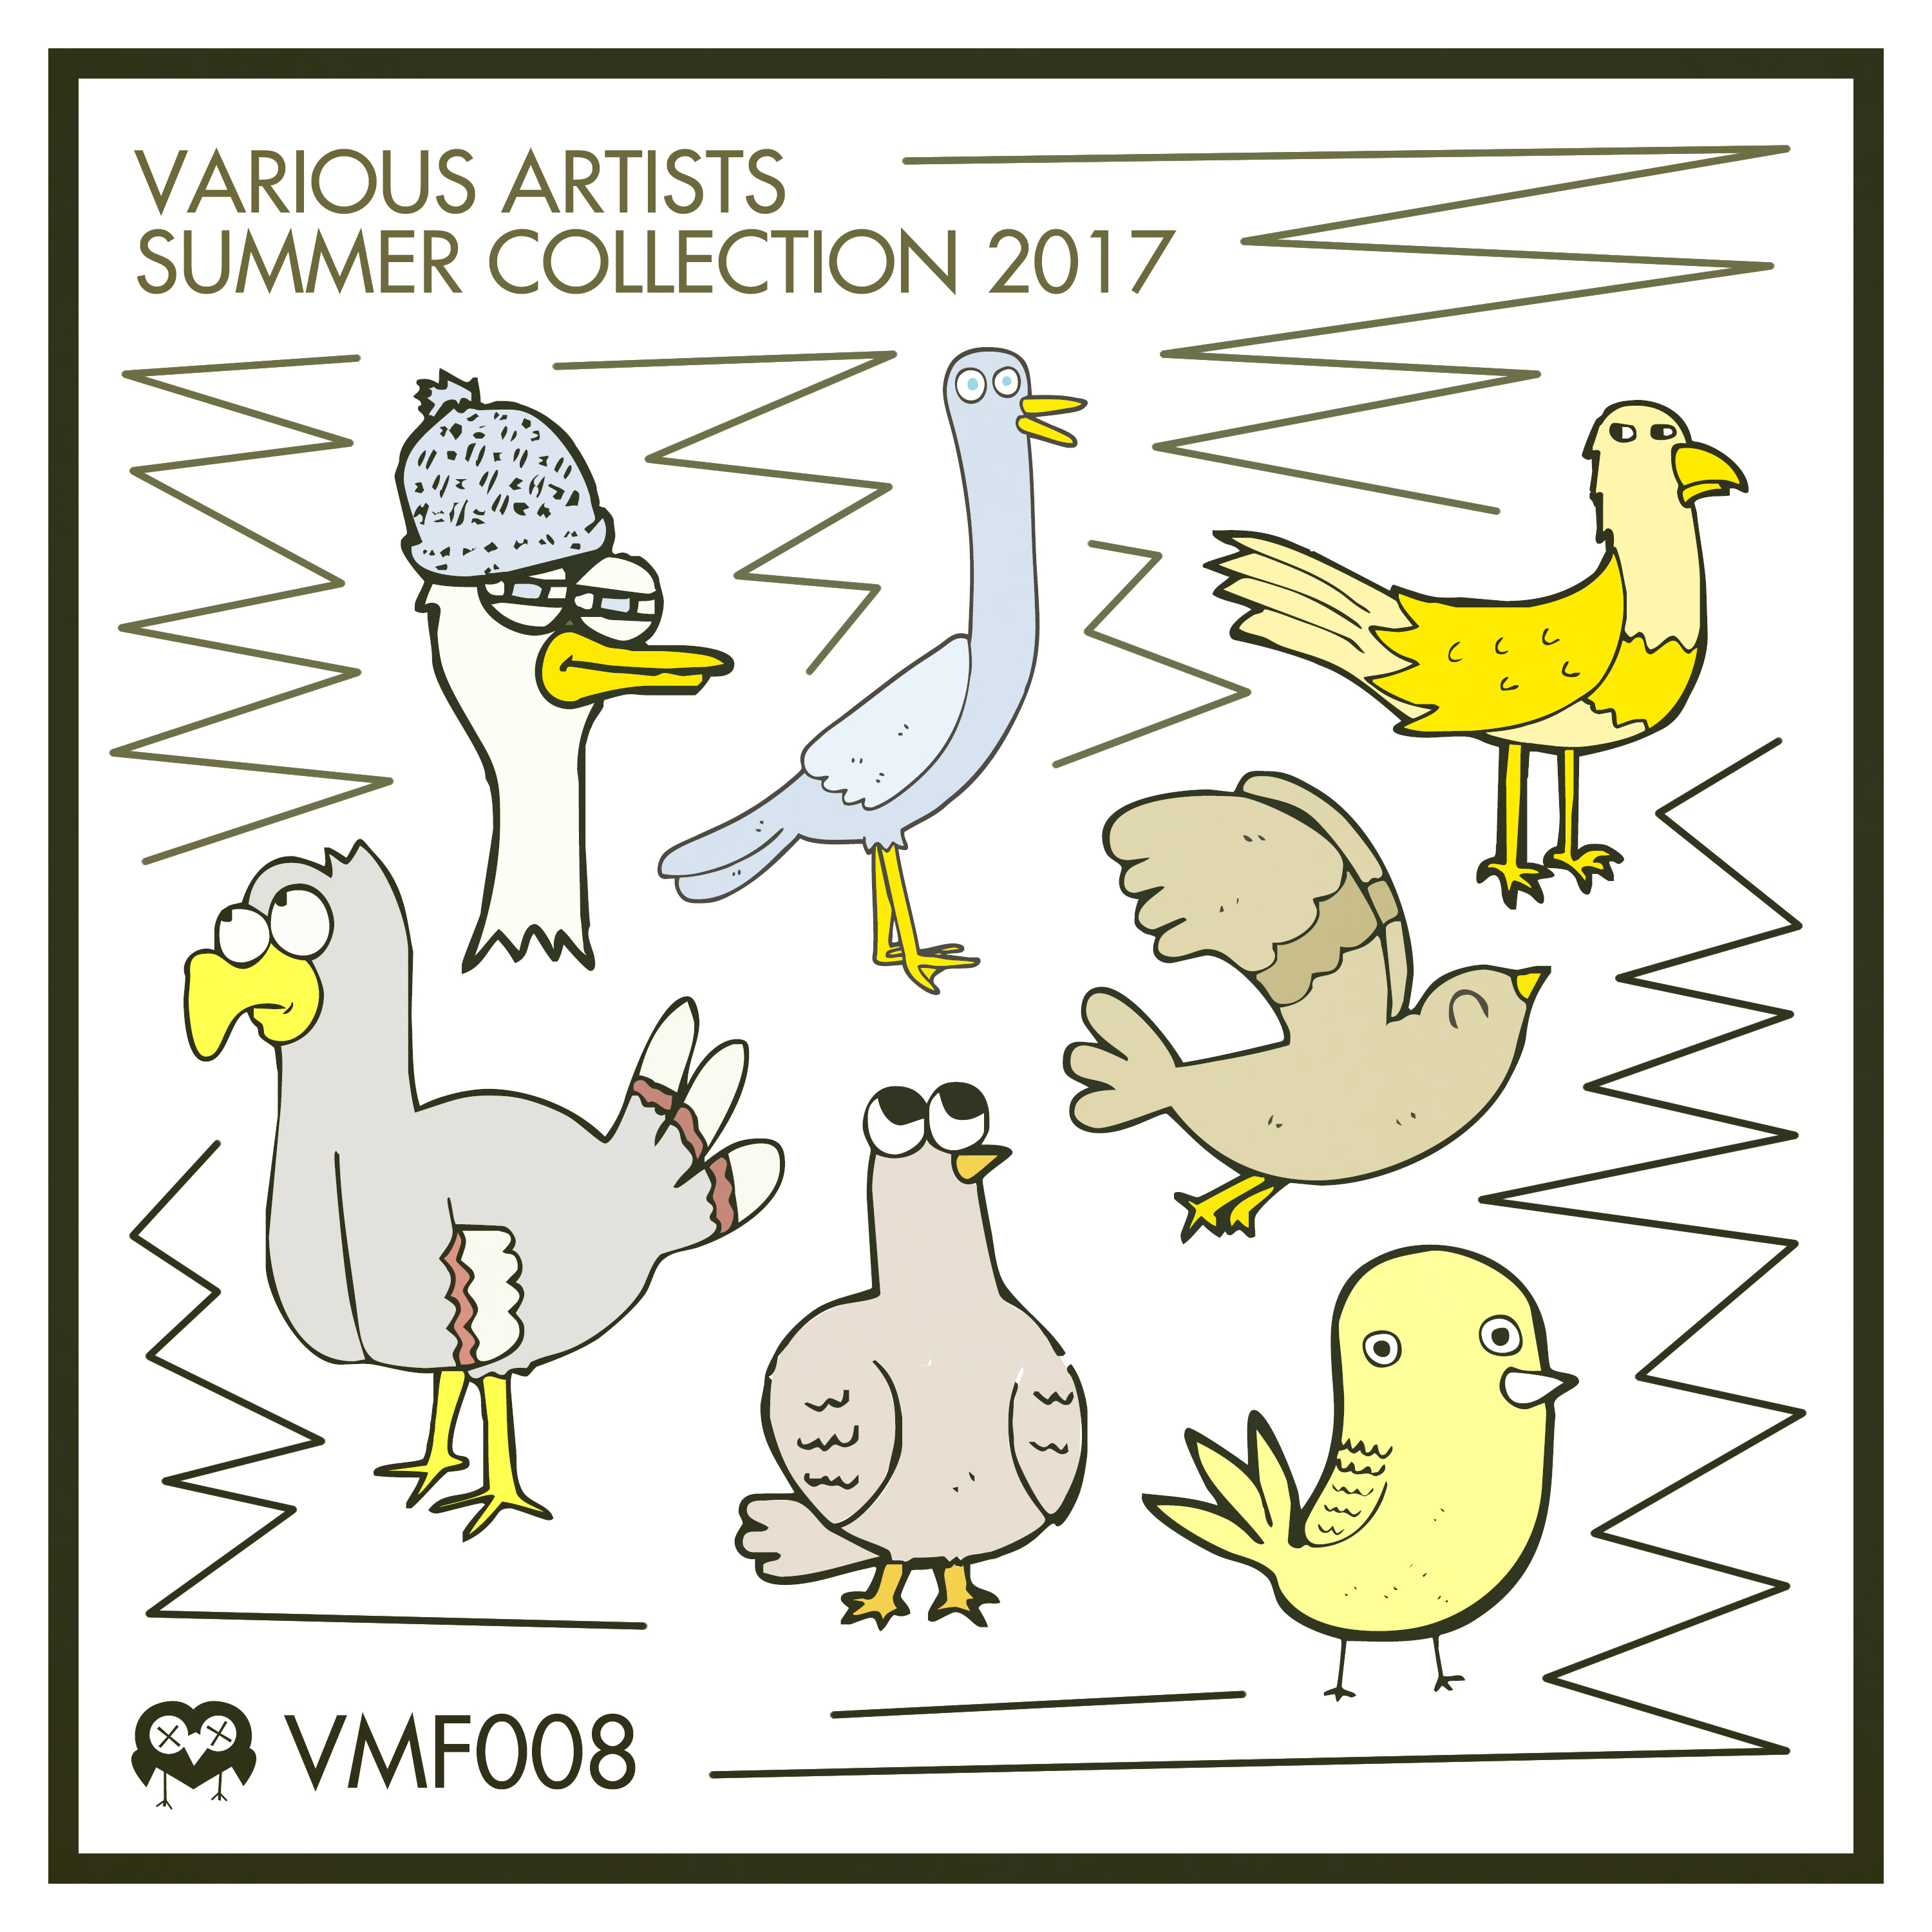 VMF 008 – Summer Collection